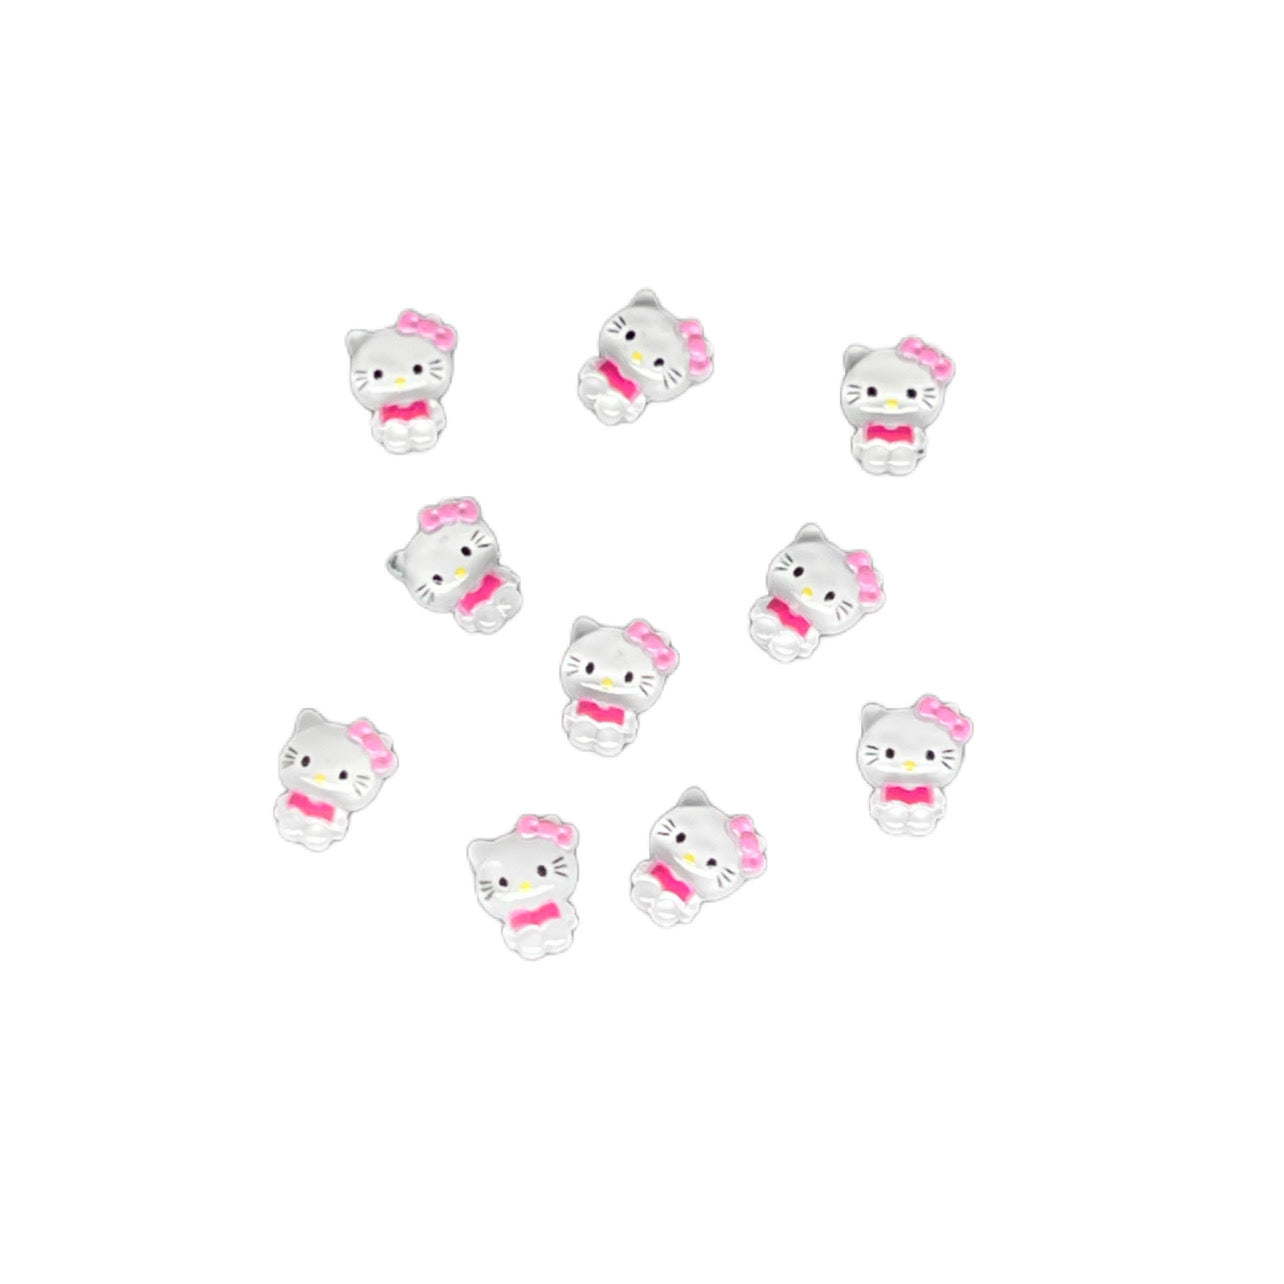 Love hello kitty charms 🤍 #fyp #nailtech #nailinspo #hellokittynails , nails with charms